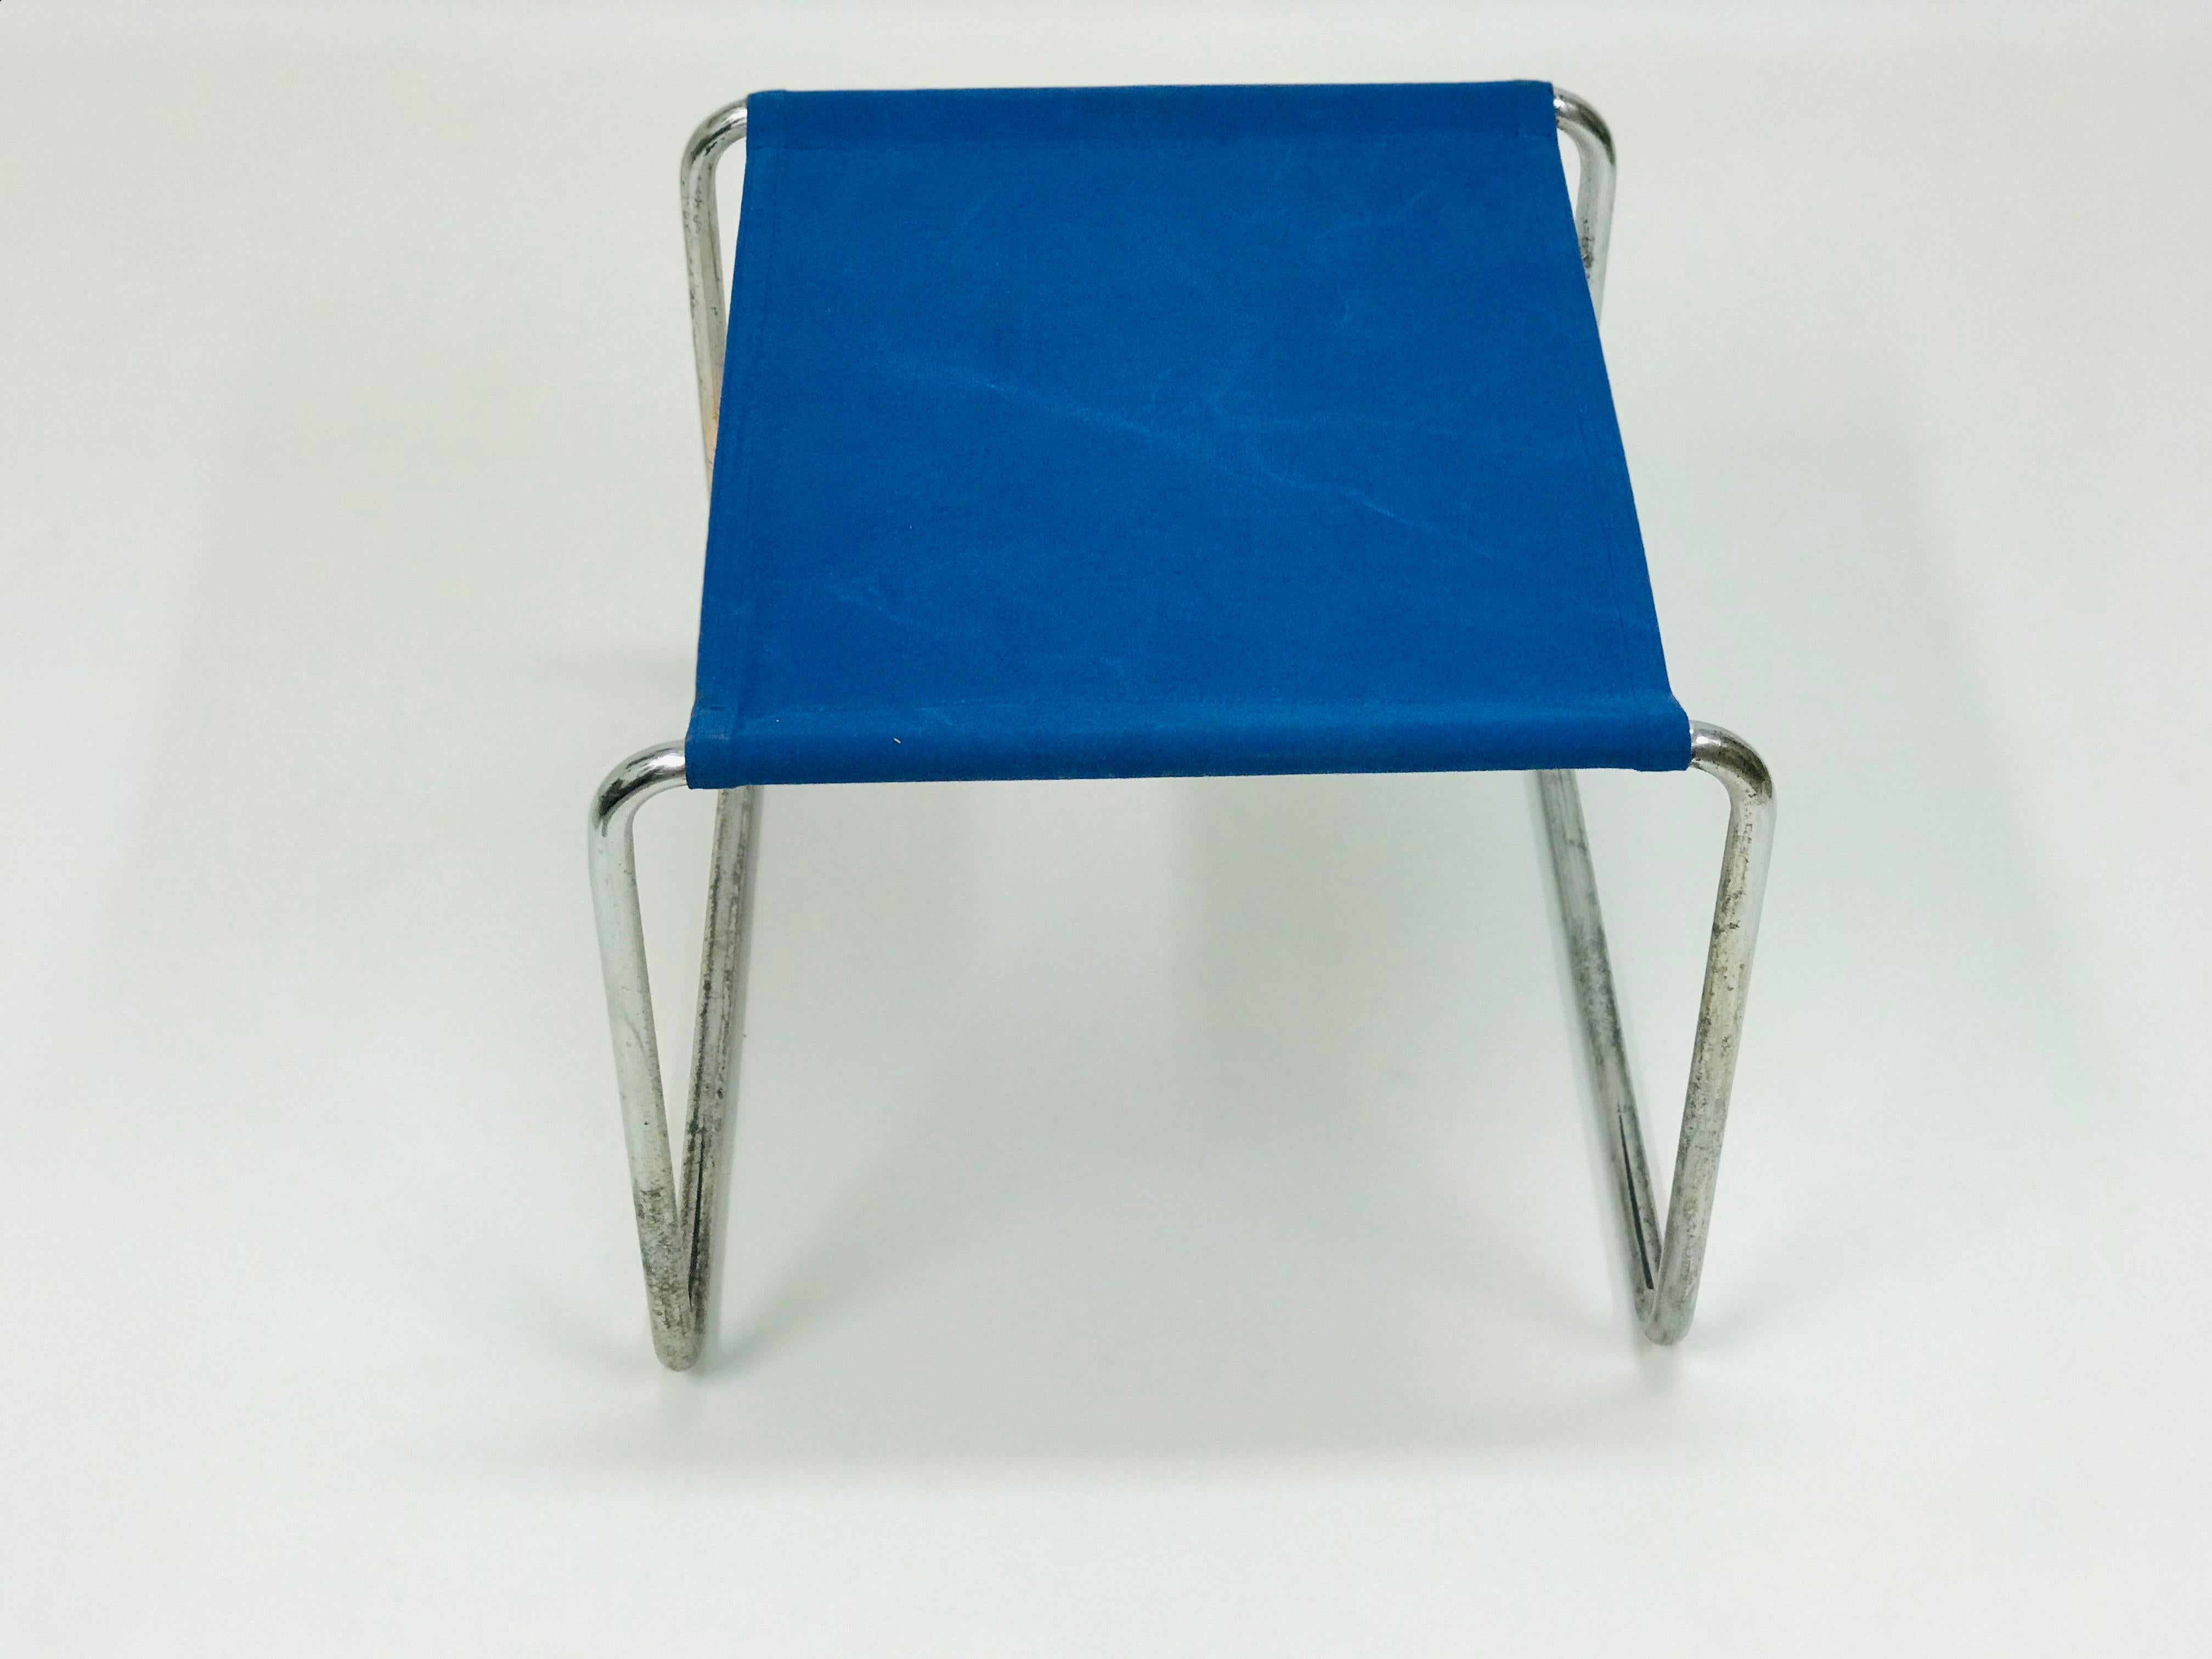 The tabouret by Marcel Breuer is in original condition. The fabric seat is attached with steel chrome-plated construction.